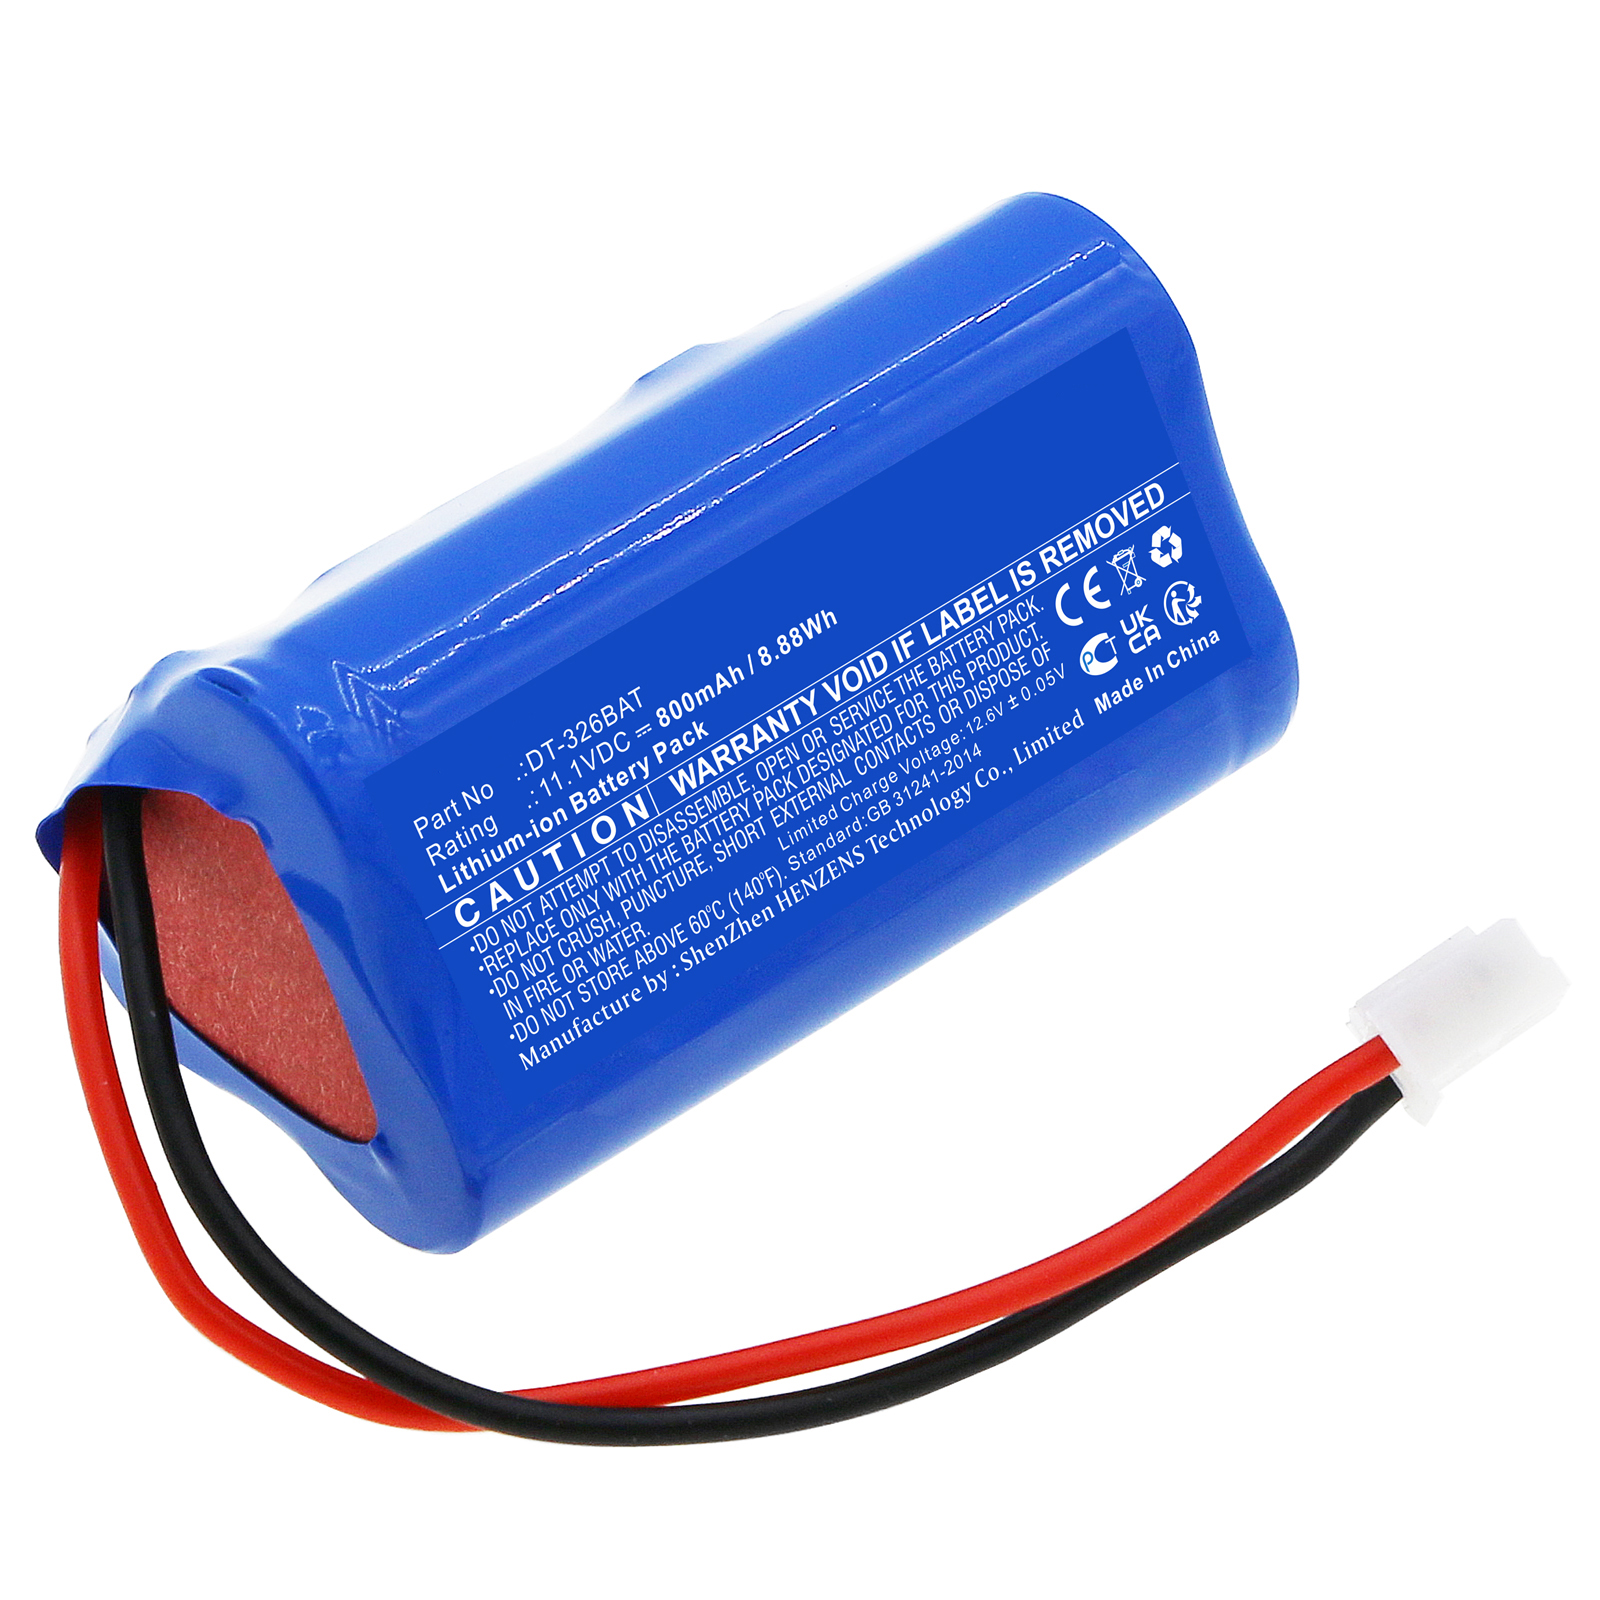 Batteries for ShimpoVacuum Cleaner